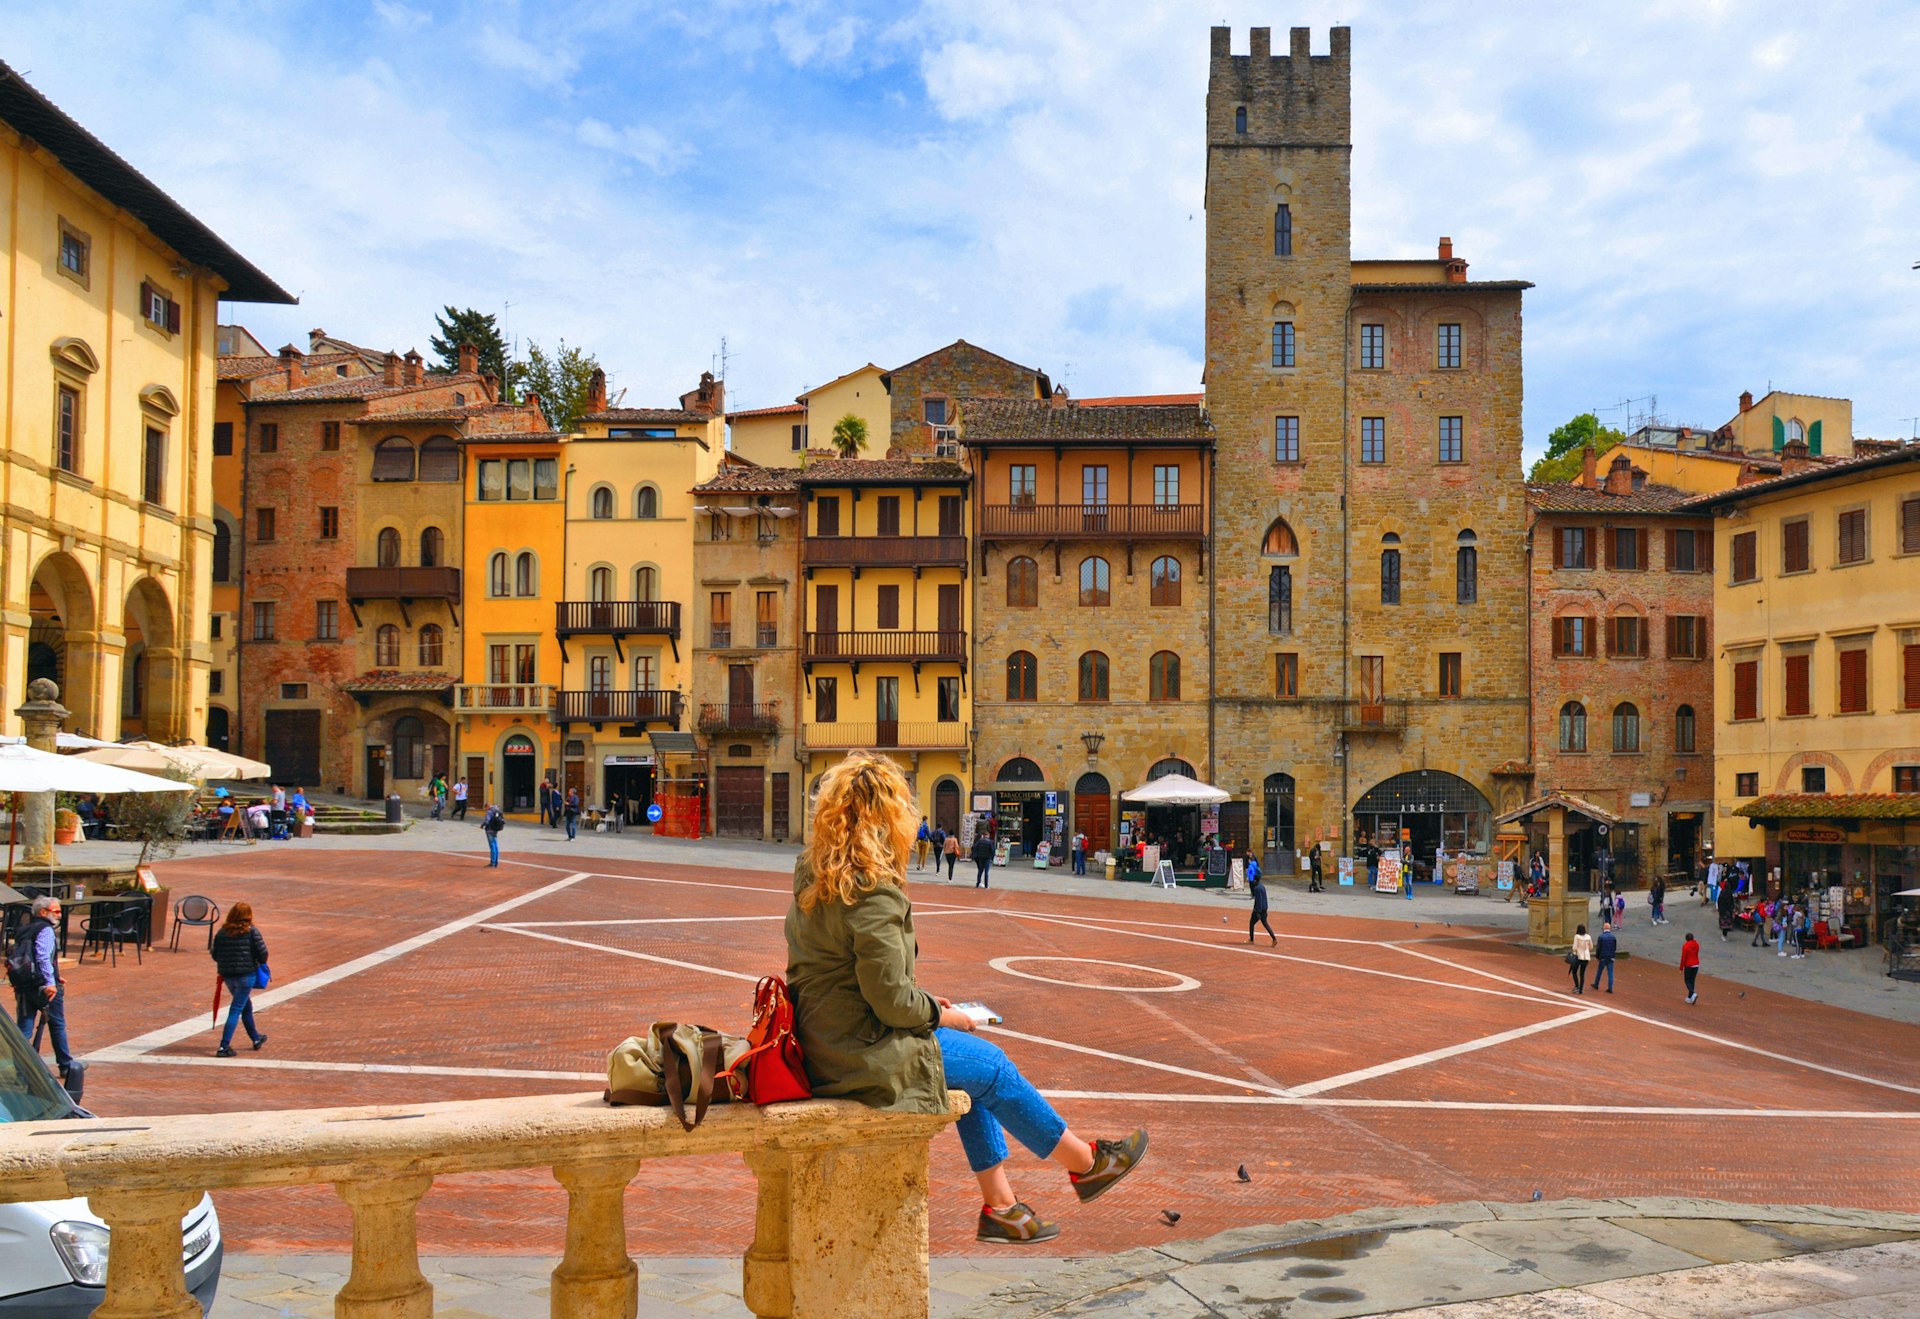 Woman sitting on a stone handrail facing towards a city square dominated by a tower